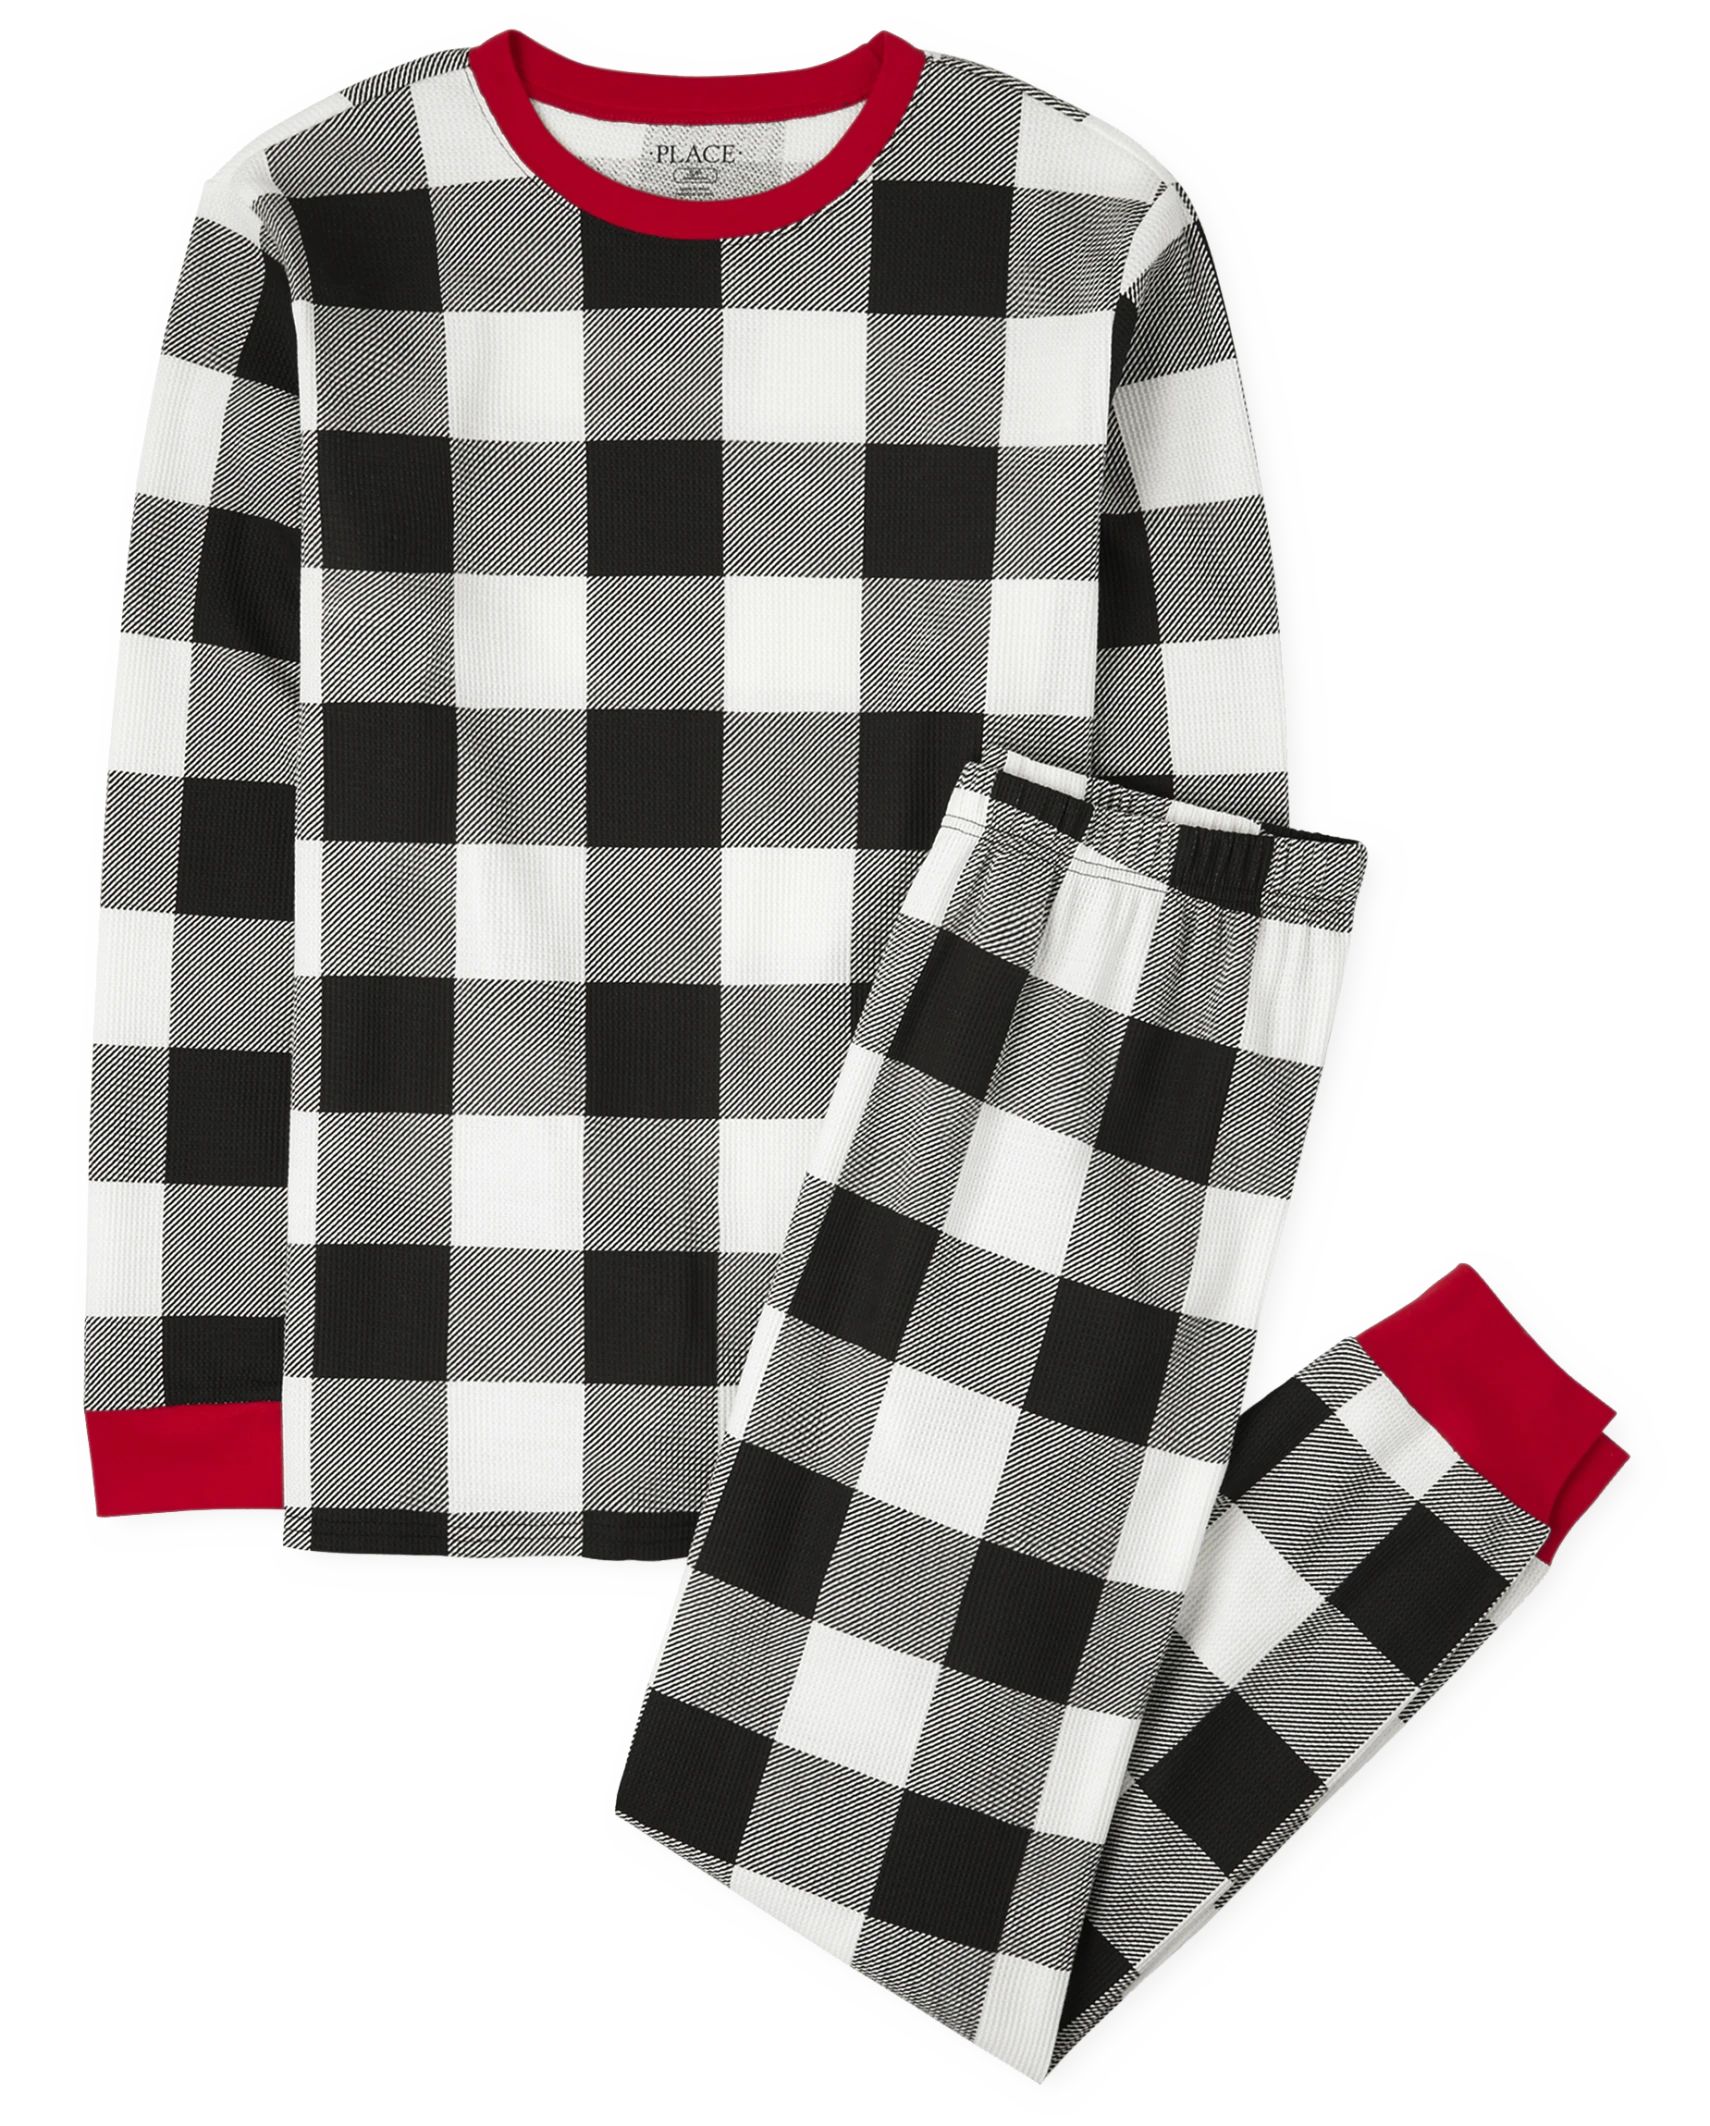 Unisex Adult Matching Family Thermal Buffalo Plaid Cotton Pajamas - black | The Children's Place